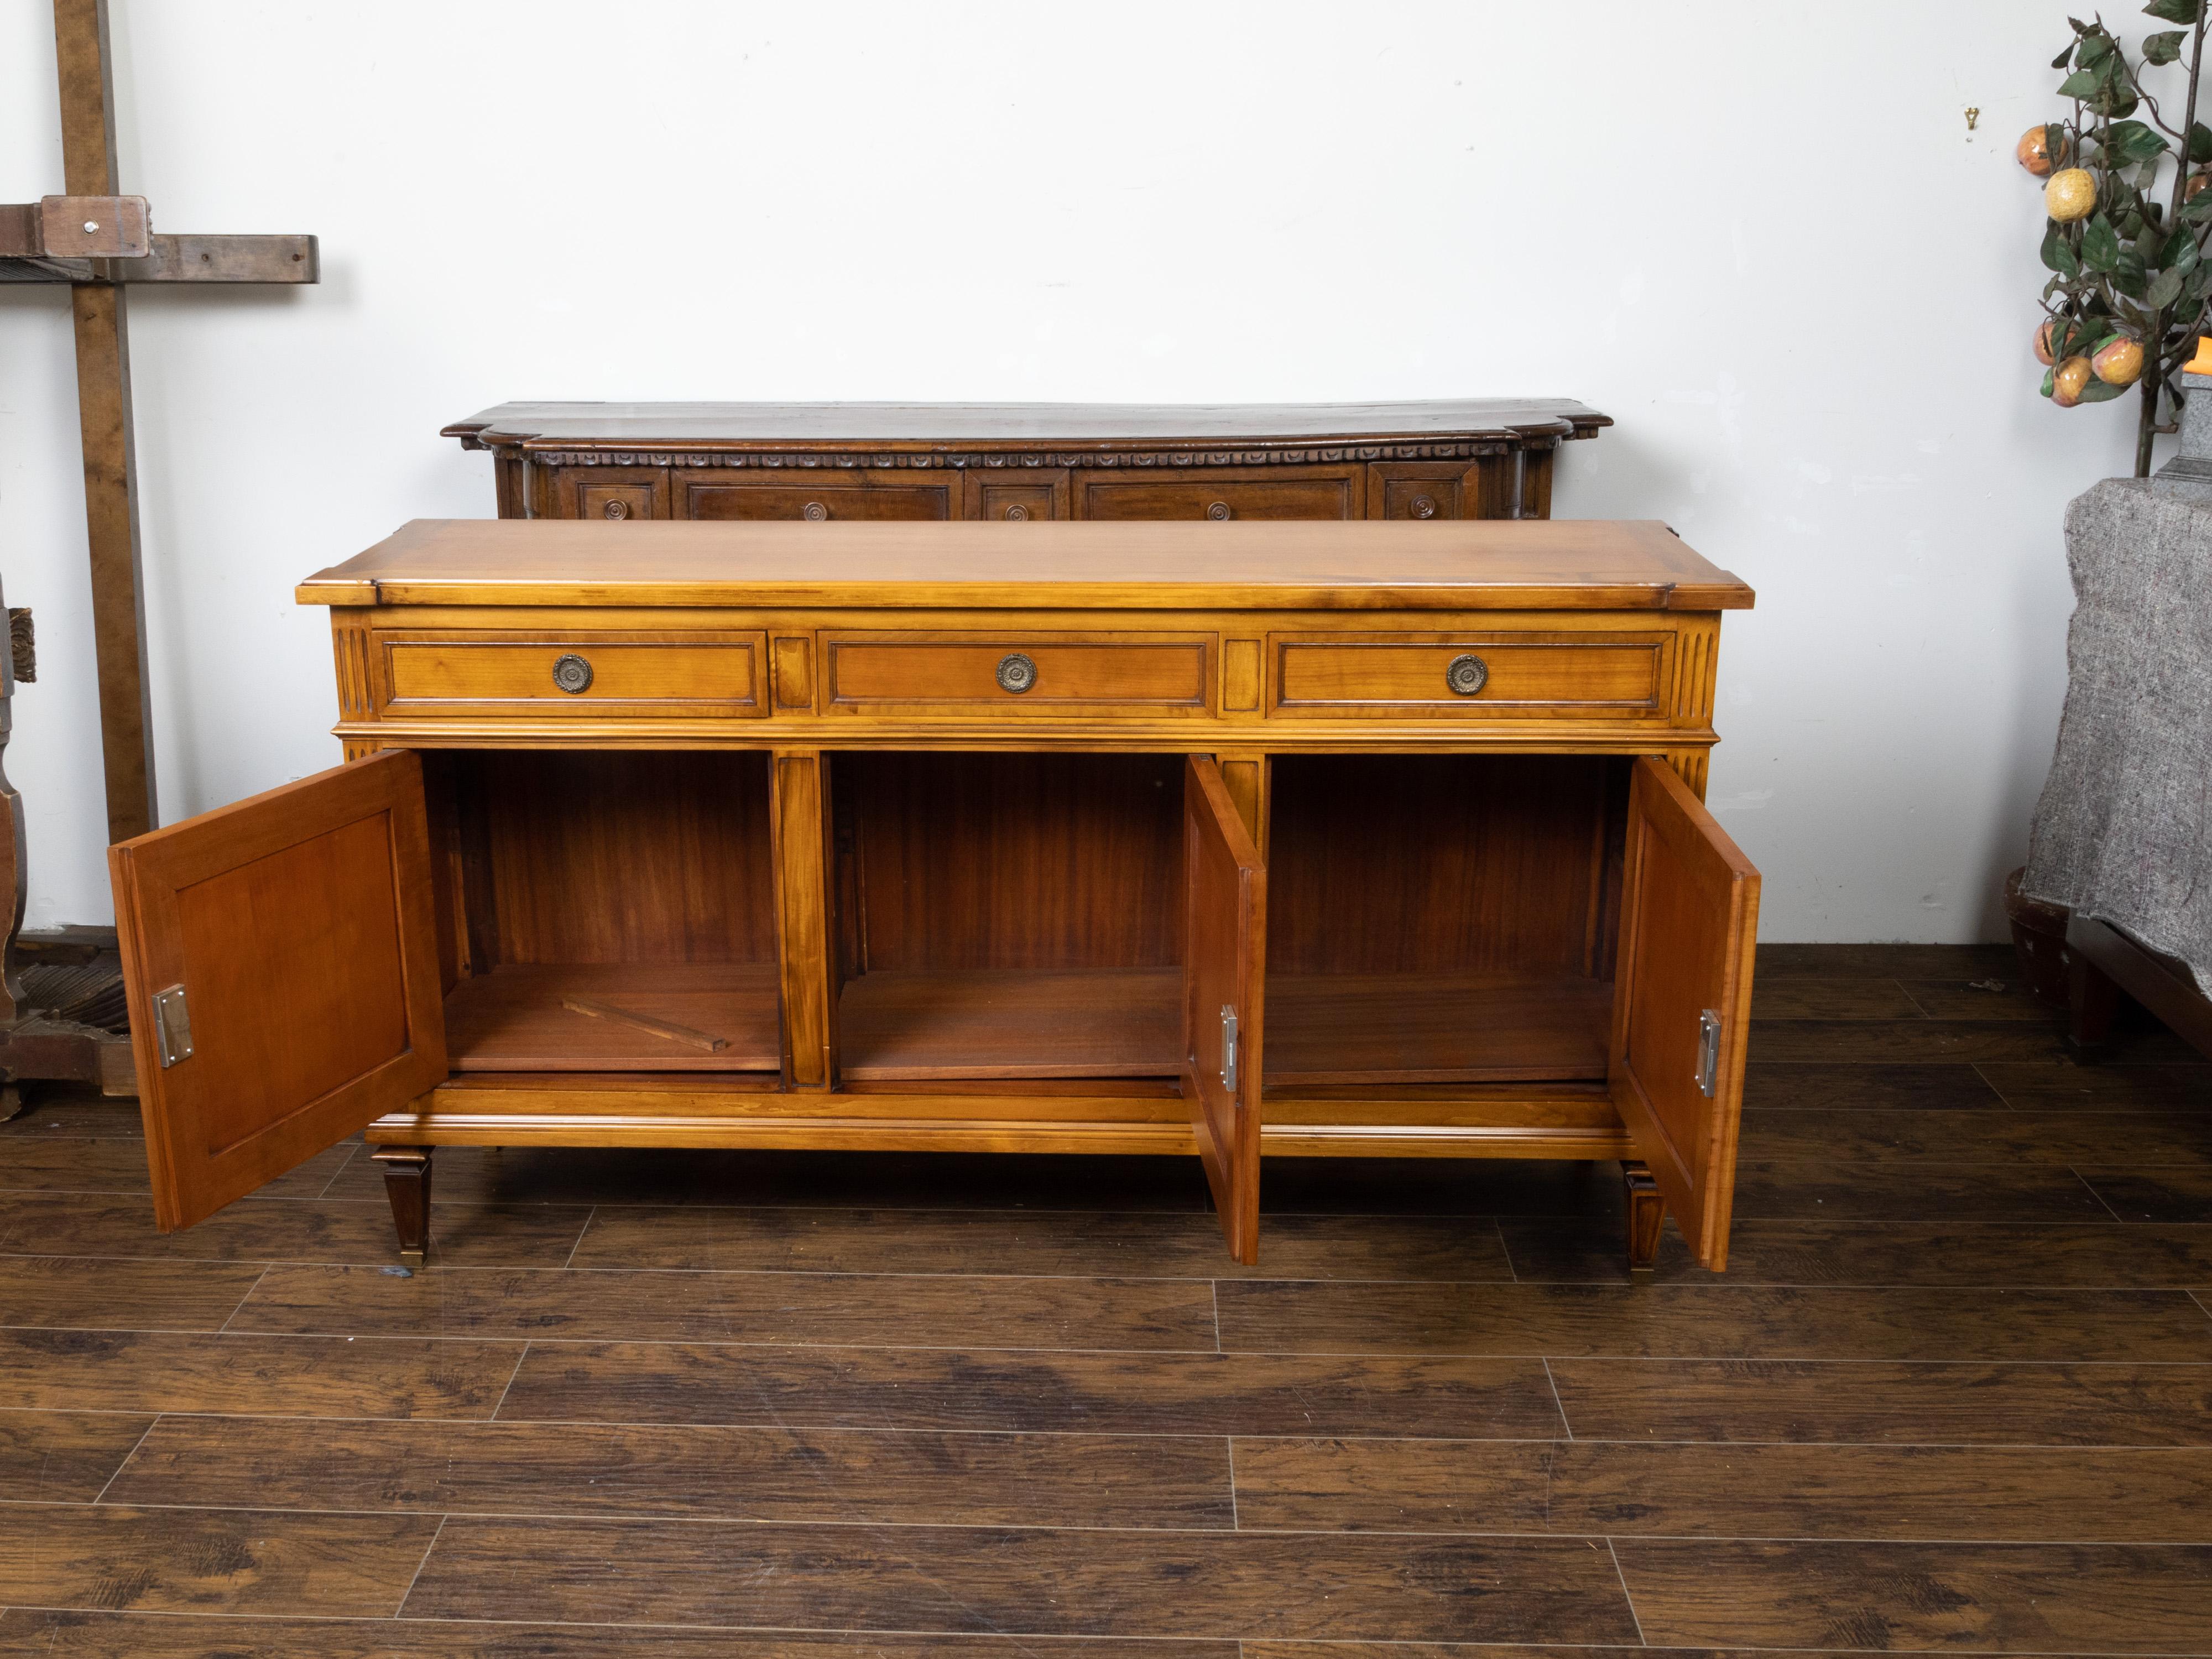 A French walnut enfilade from the early 20th century, with three drawers over three doors. Created in France during the first quarter of the 20th century, this walnut enfilade features a rectangular top with protruding corners, sitting above three